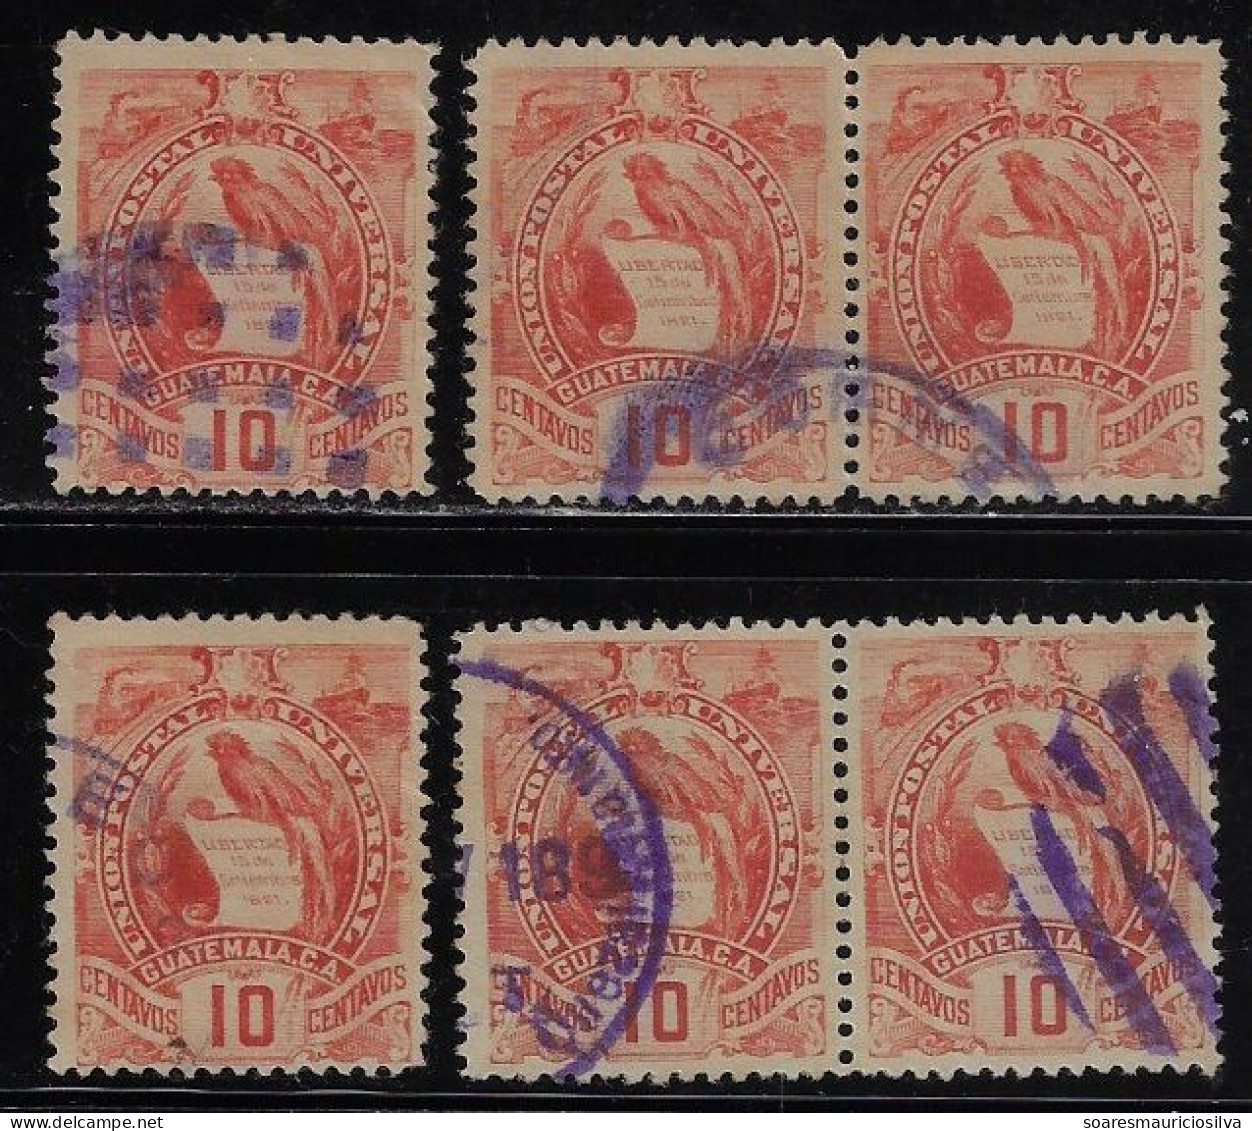 Guatemala 1886/1891 2 Stamp + 2 Pair Of Stamps Quetzal Train Ship 10 Cents Date Cancel + Mute Fancy Postmark - Guatemala